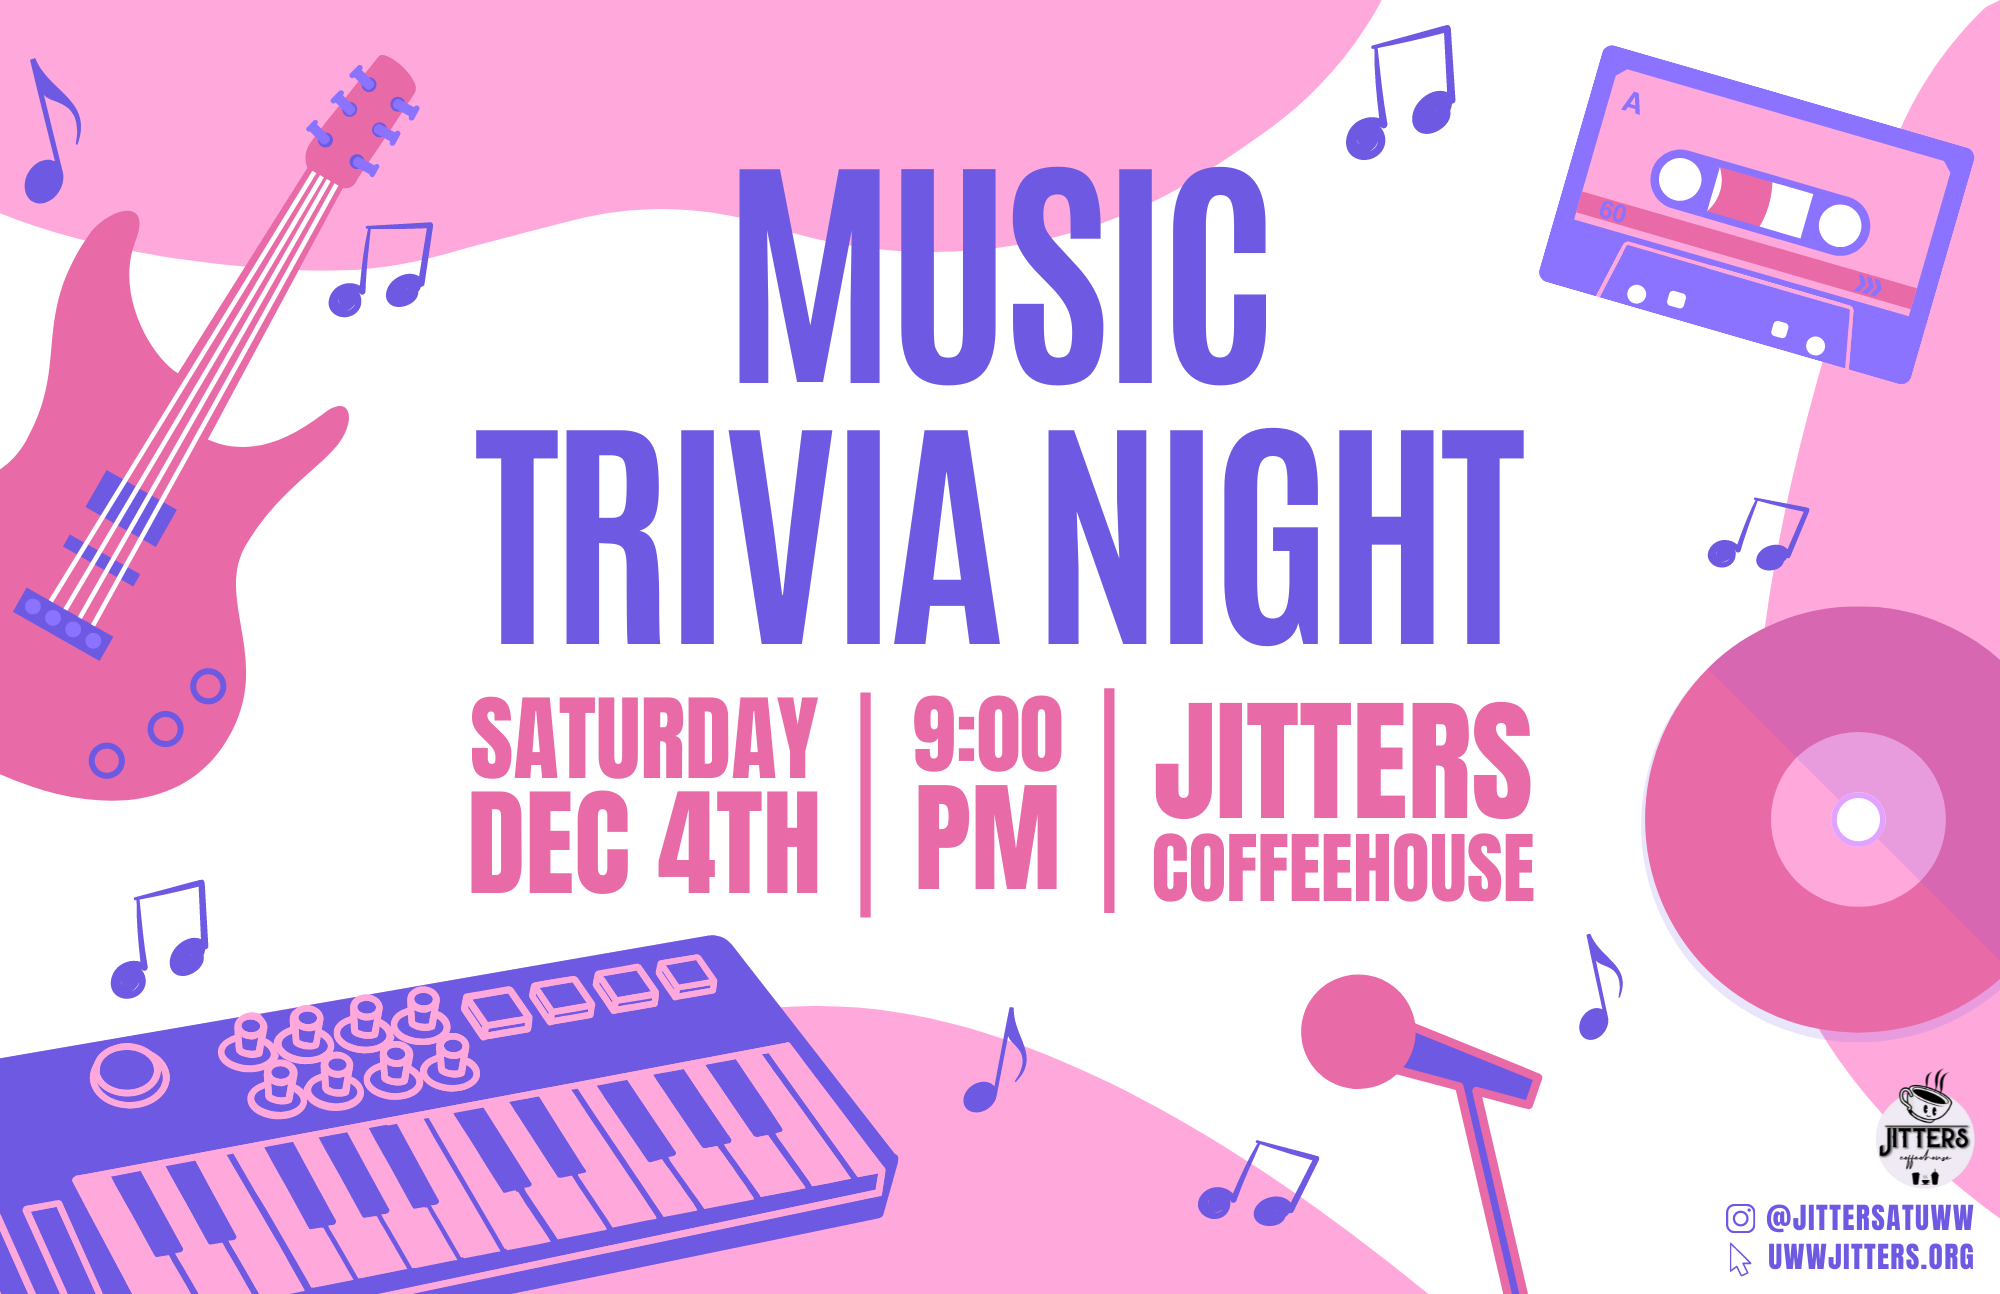 jitters music trivia poster with event details